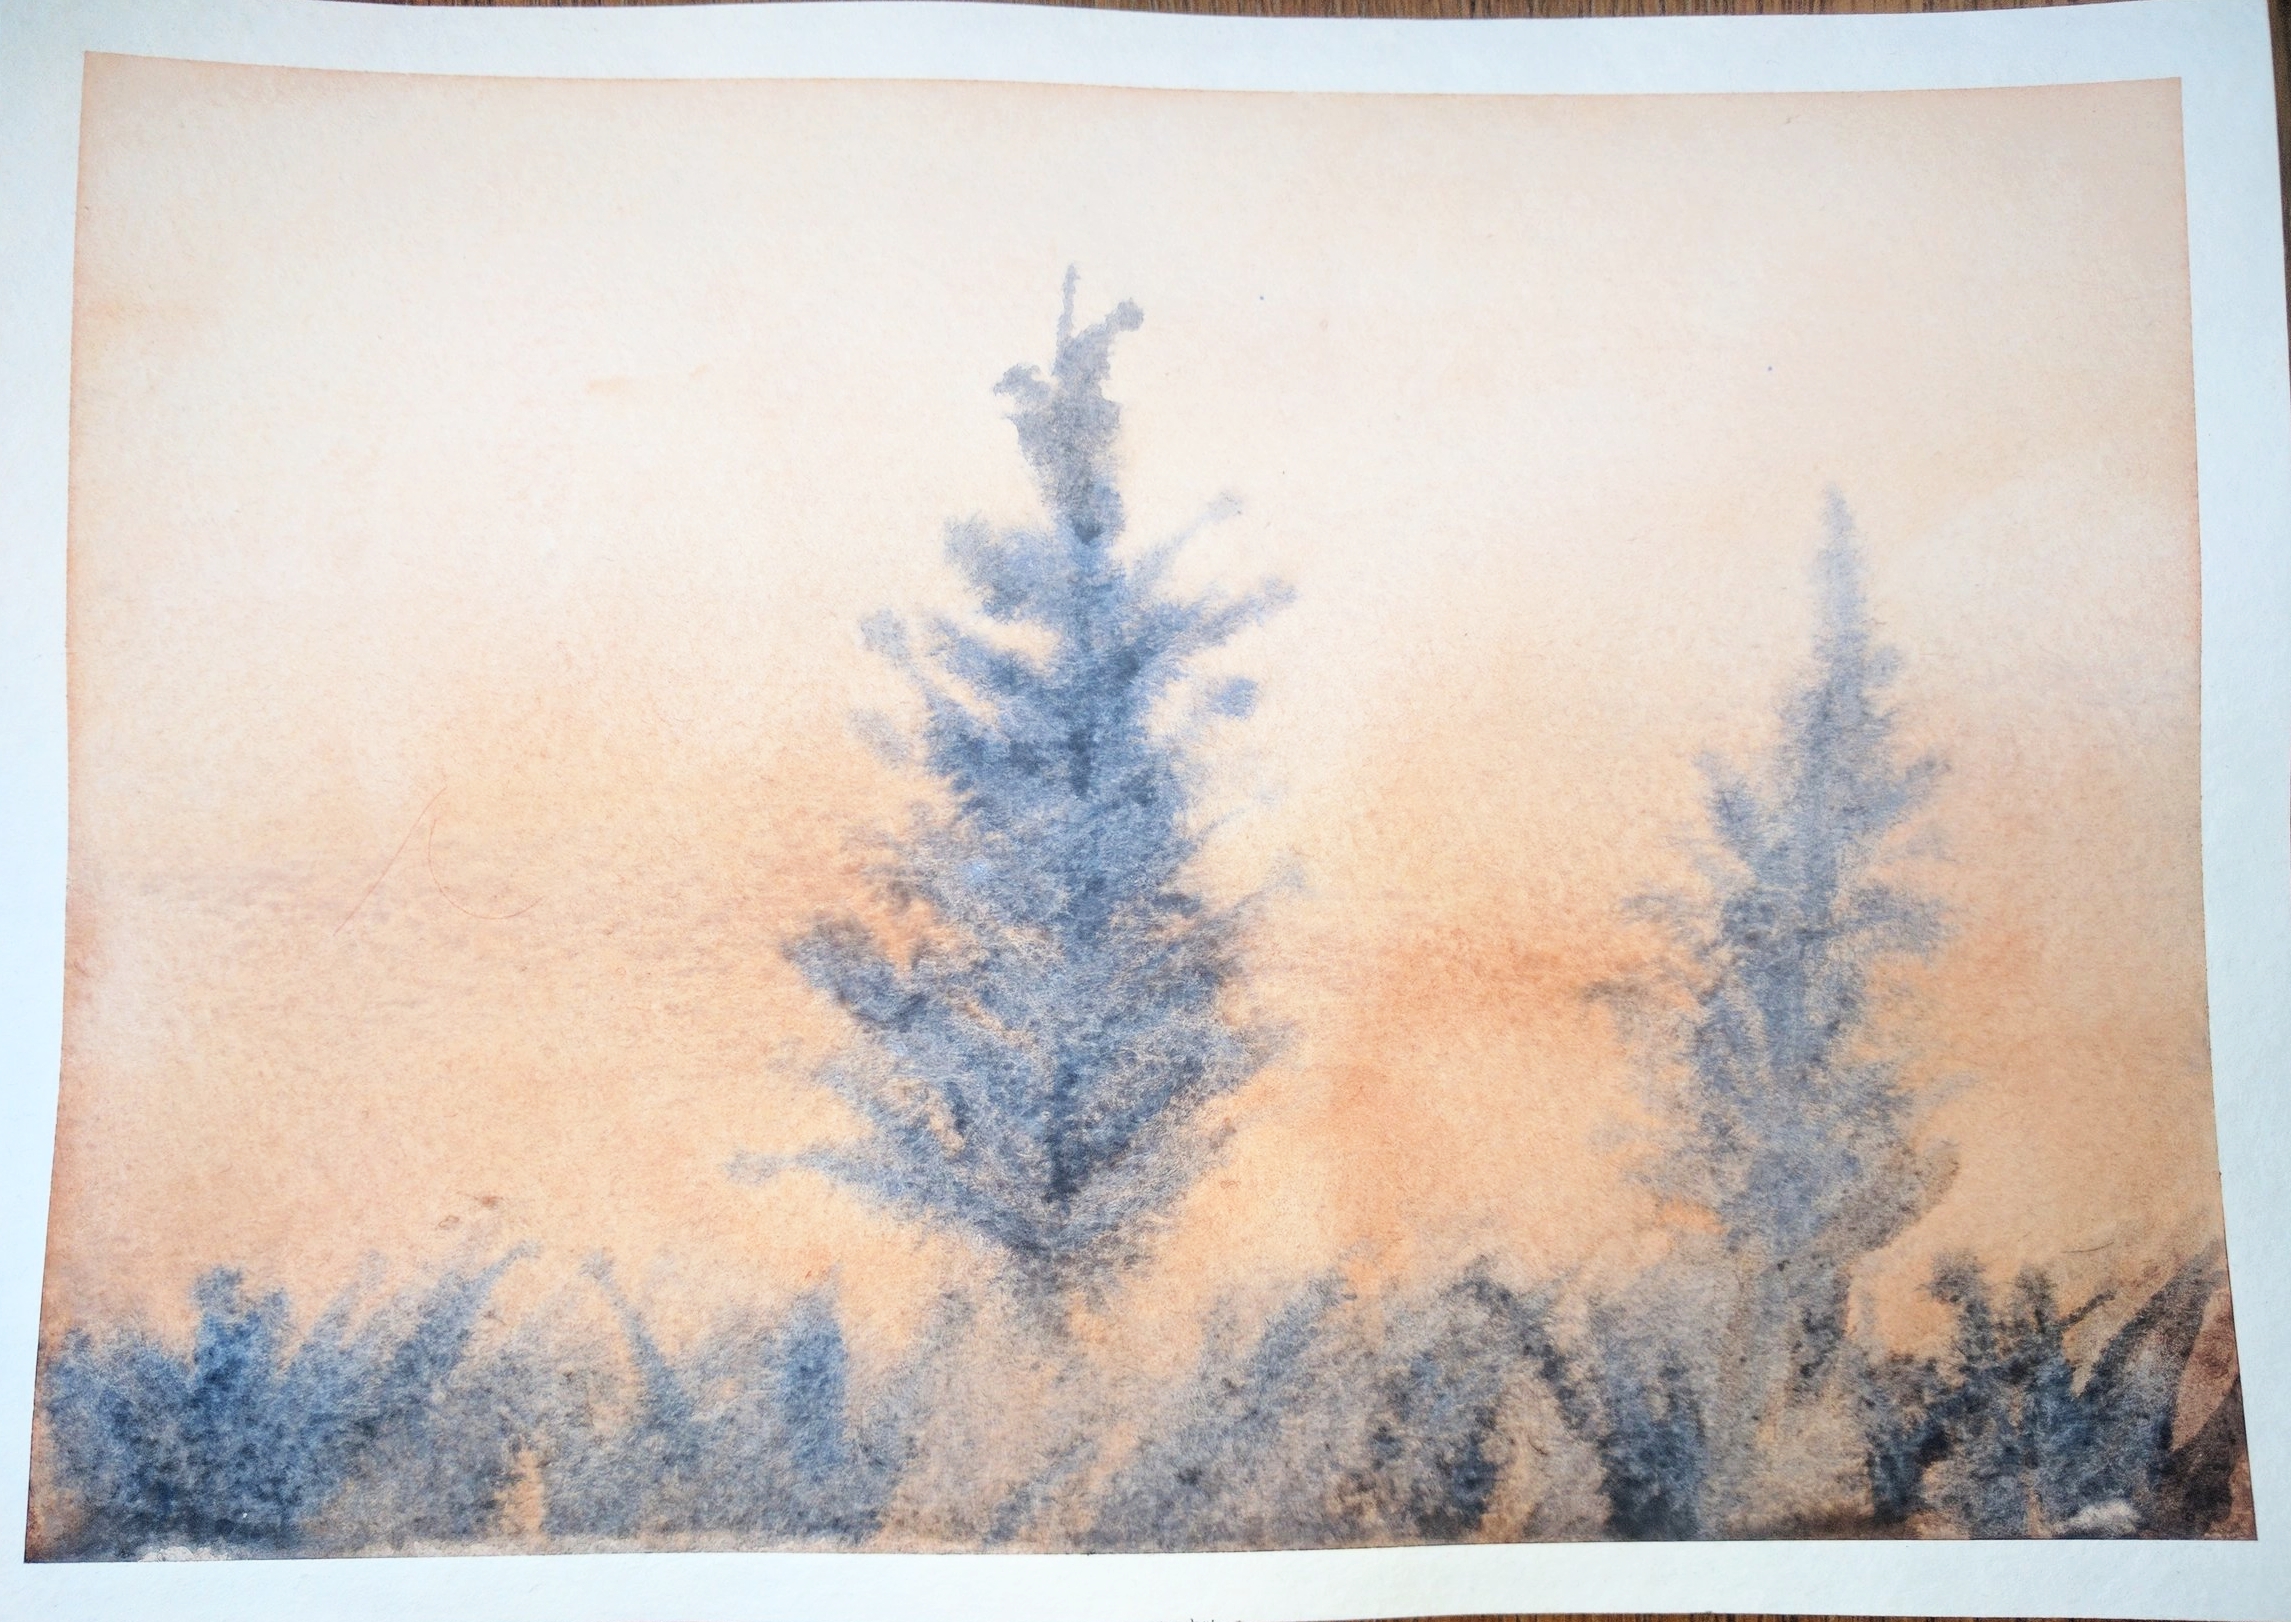  February, 2017  A third attempt at "Two Pines". &nbsp;The trees turned out softer, which I'm happy about, but I don't think it was my best attempt at grass in the foreground. 